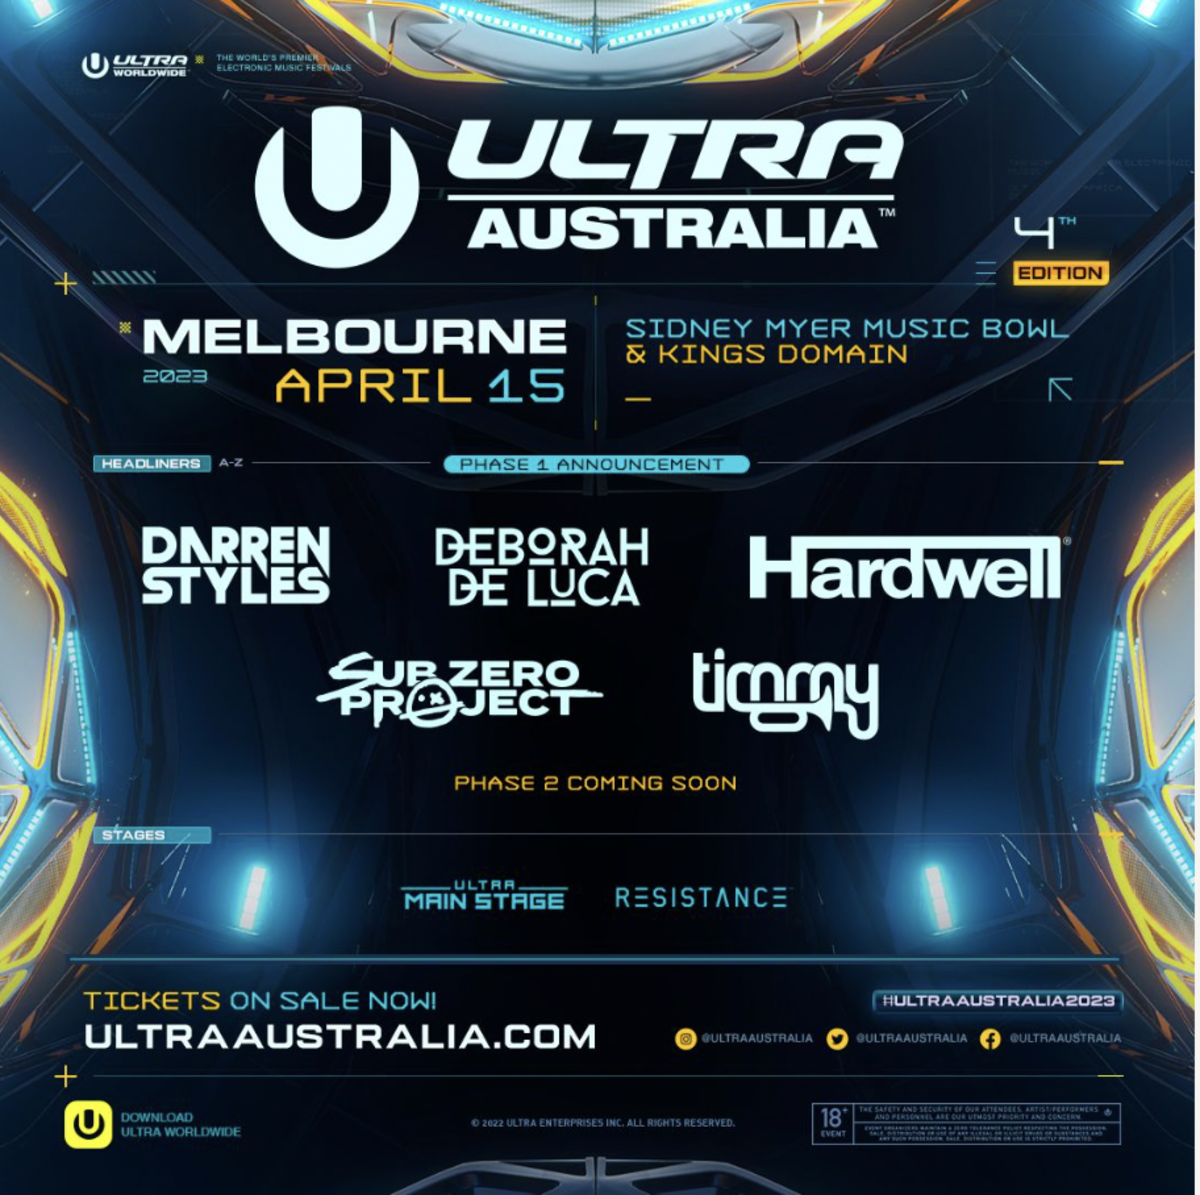 Ultra Australia 2023 to Feature Hardwell, Sub Zero Project and More